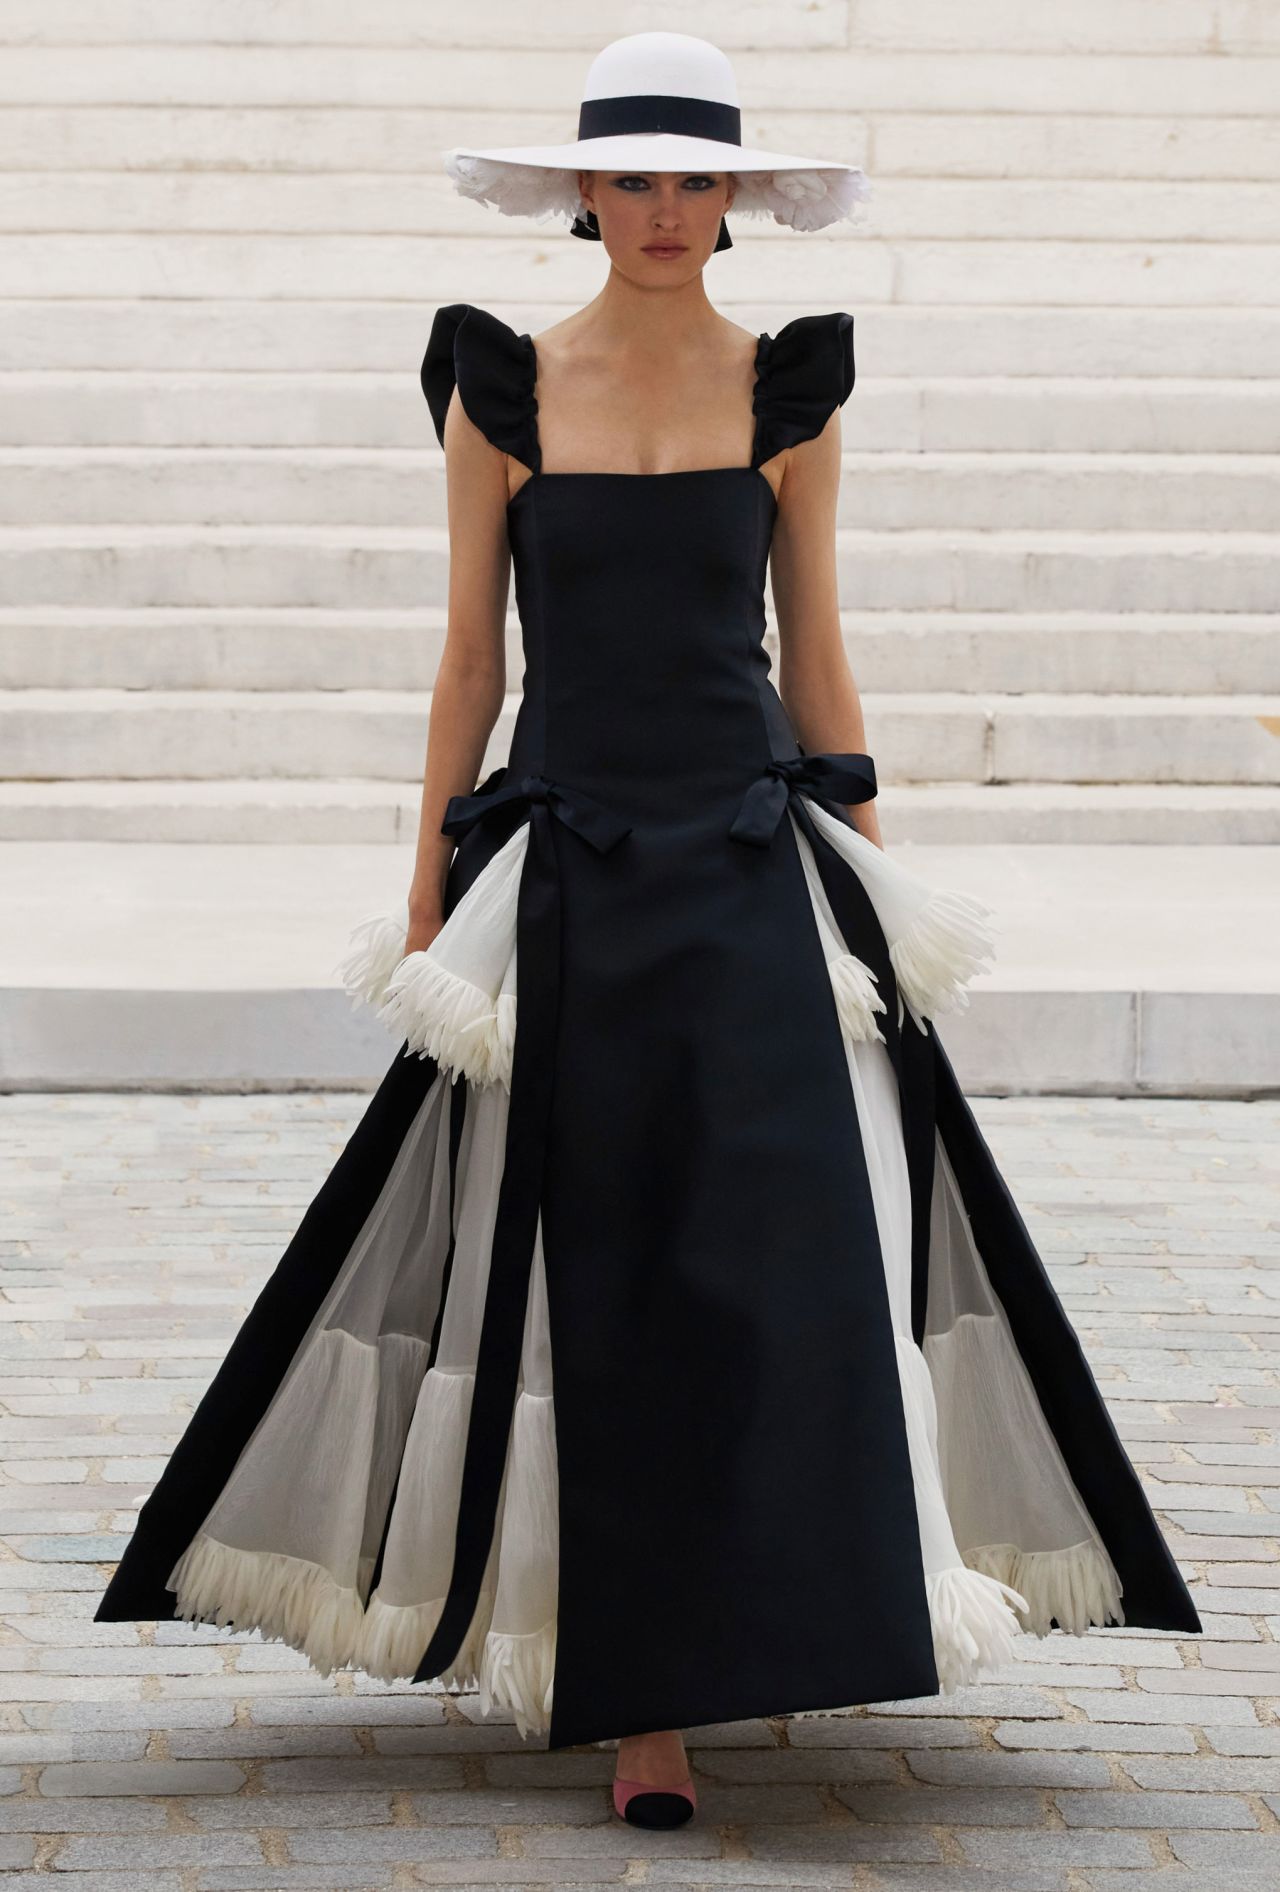 Chanel staged its show at the Palais Galliera, City of Paris Fashion Museum. Here, a look inspired by old portraits of Gabrielle Chanel dressed in black or white 1880s style dresses. 